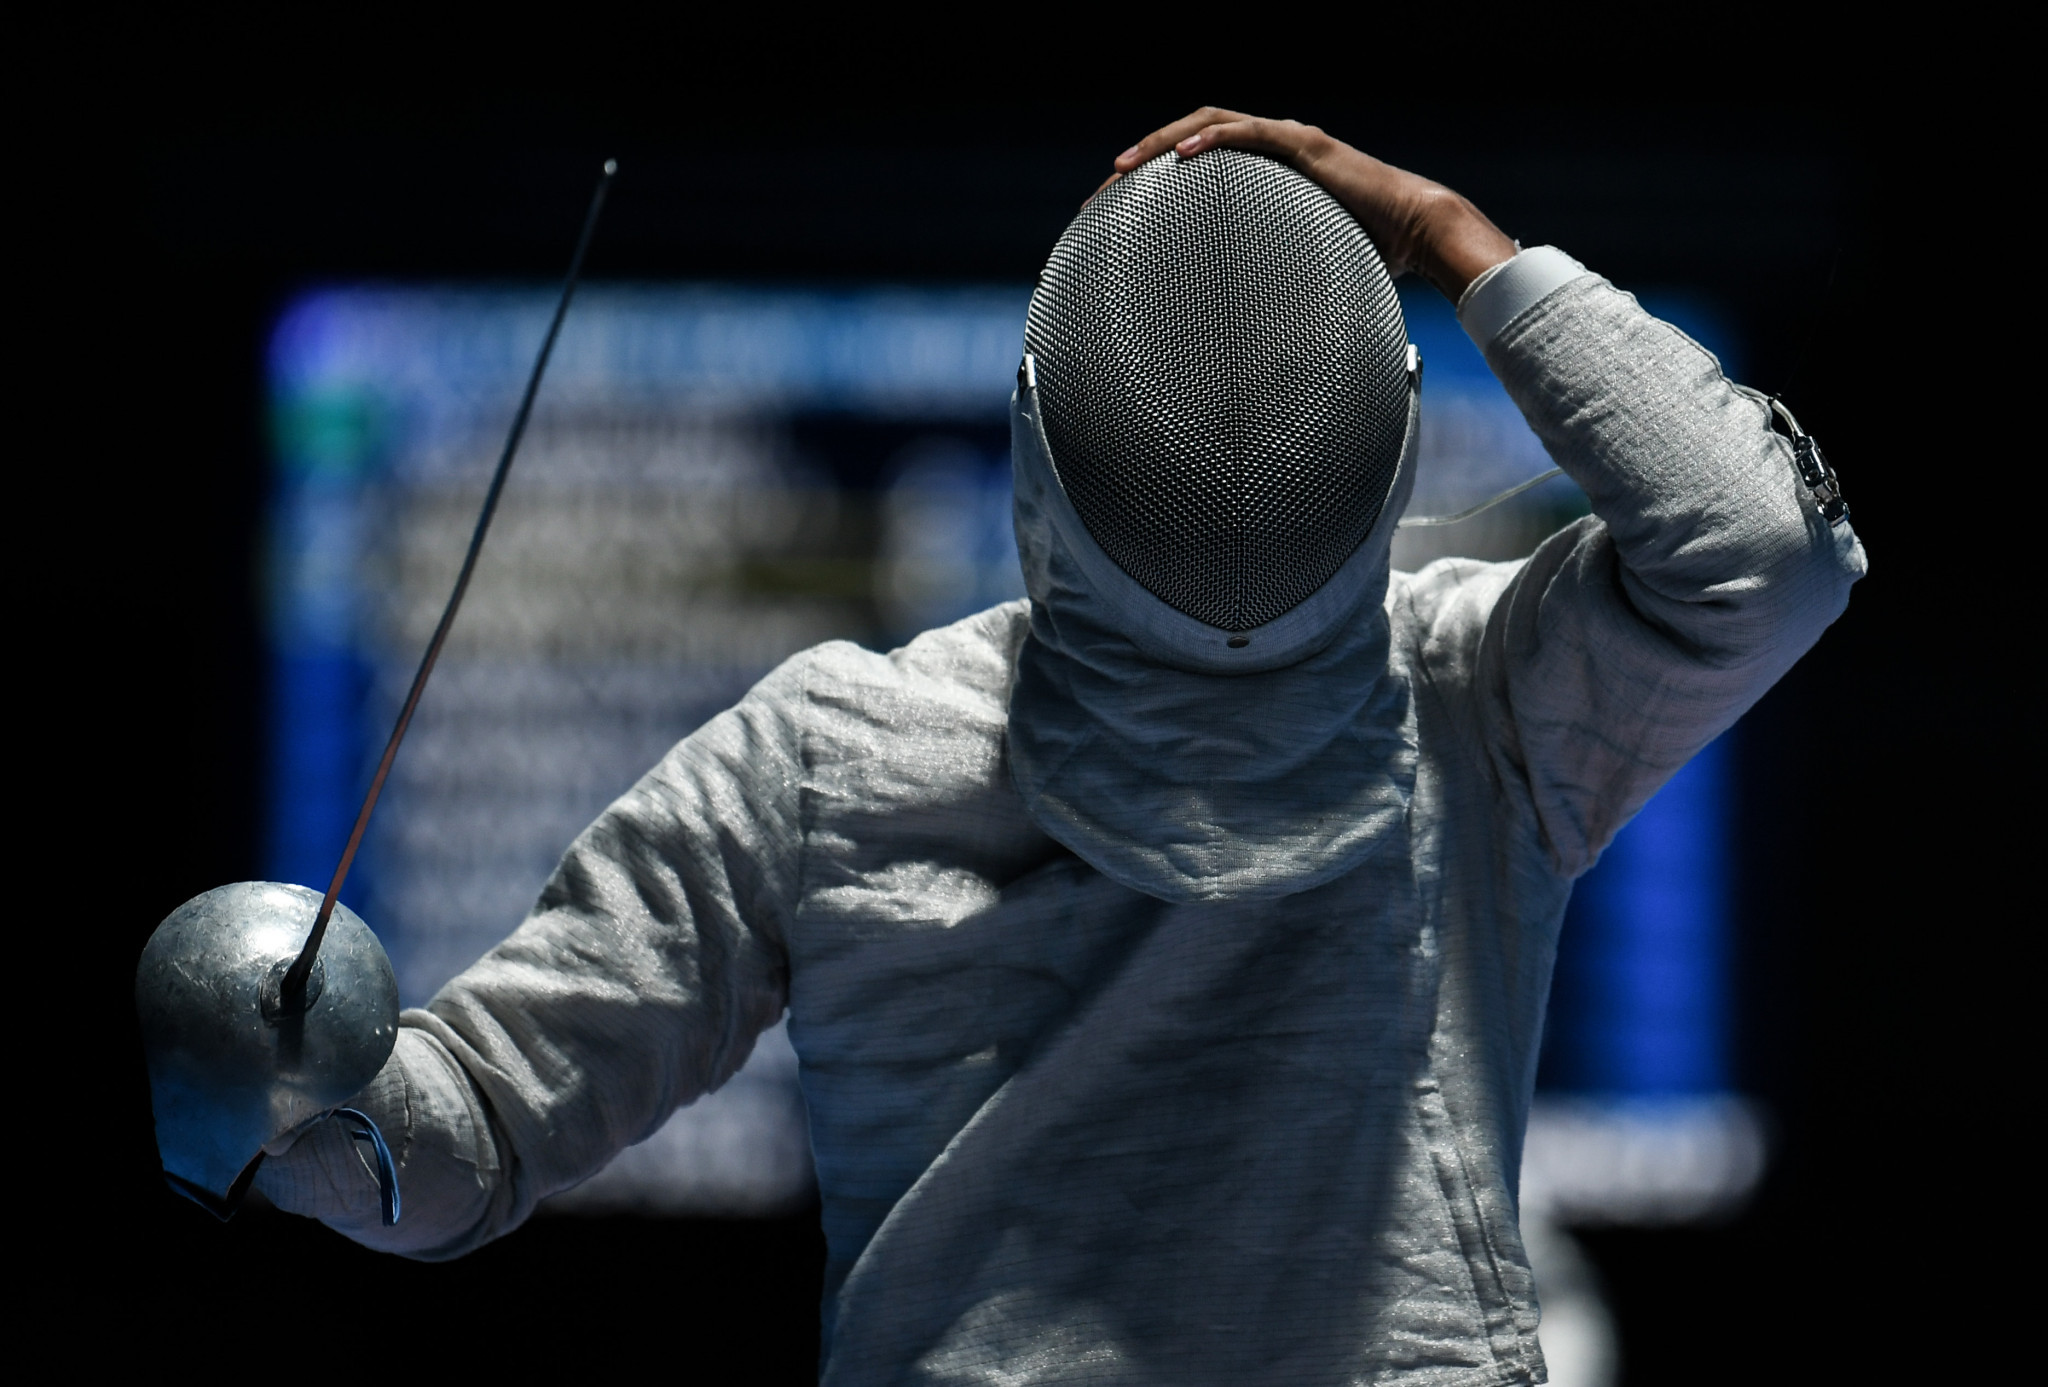 India won the gold medal in the men’s epee team event in London ©Getty Images